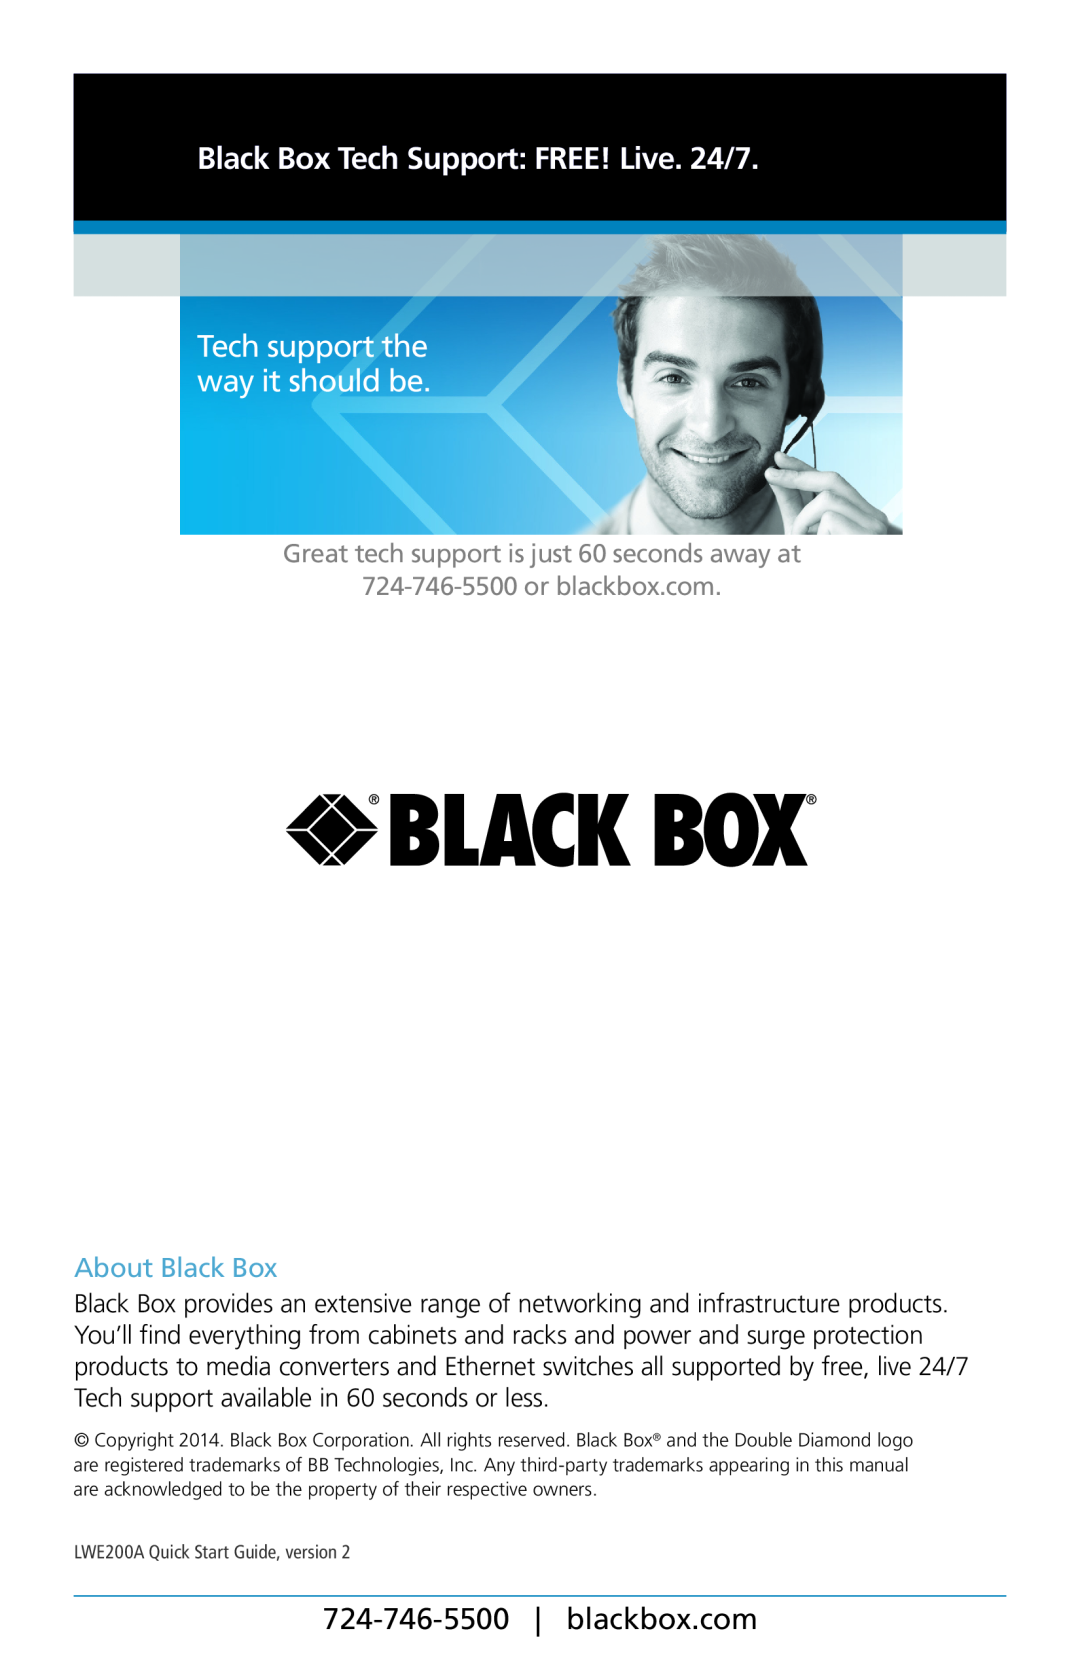 Black Box LWE200A-S quick start Tech support the way it should be, Black Box Tech Support FREE! Live. 24/7, About Black Box 